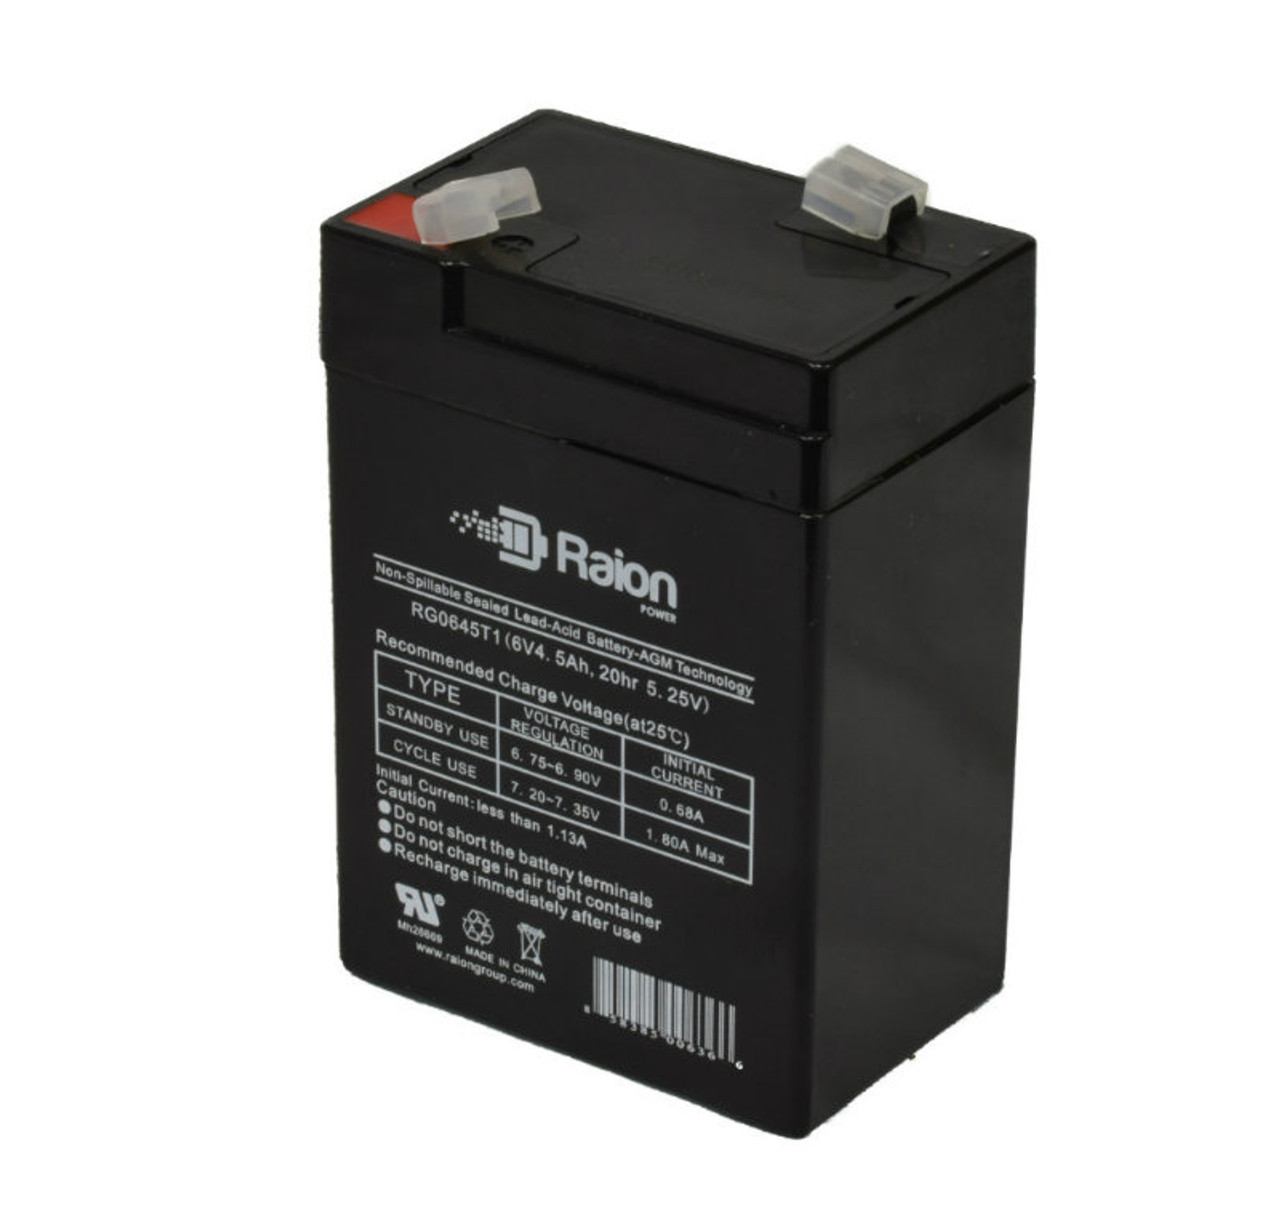 Raion Power RG0645T1 6V 4.5Ah Replacement Battery Cartridge for FirstPower FP645HR